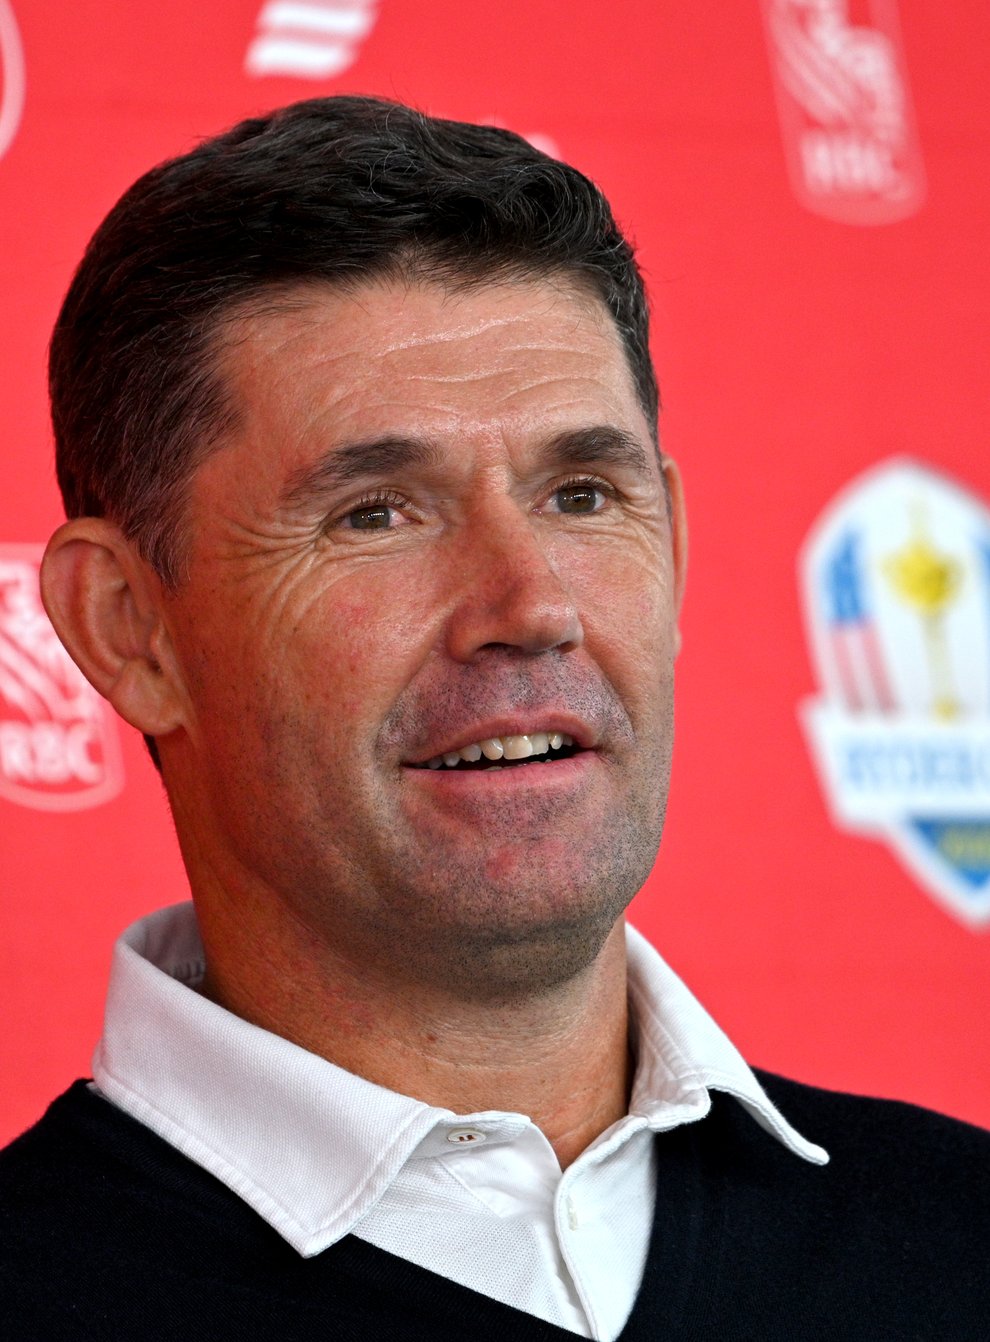 Team Europe captain Padraig Harrington saw his side suffer a record defeat (Anthony Behar/PA)